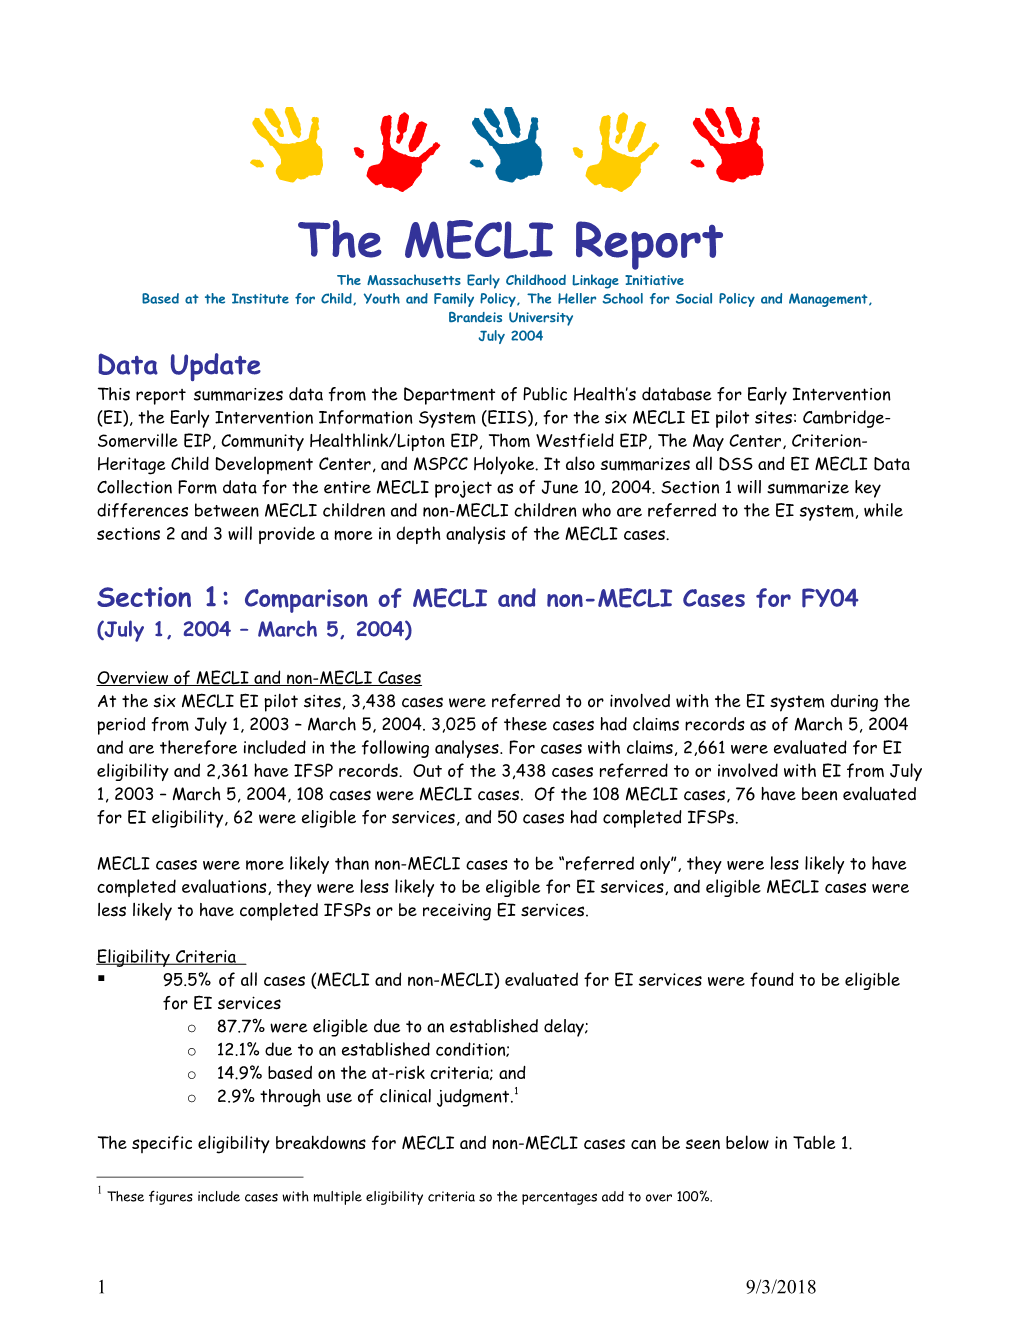 Analysis from Dph Fiscal Year 2003 and Year One of Mecli